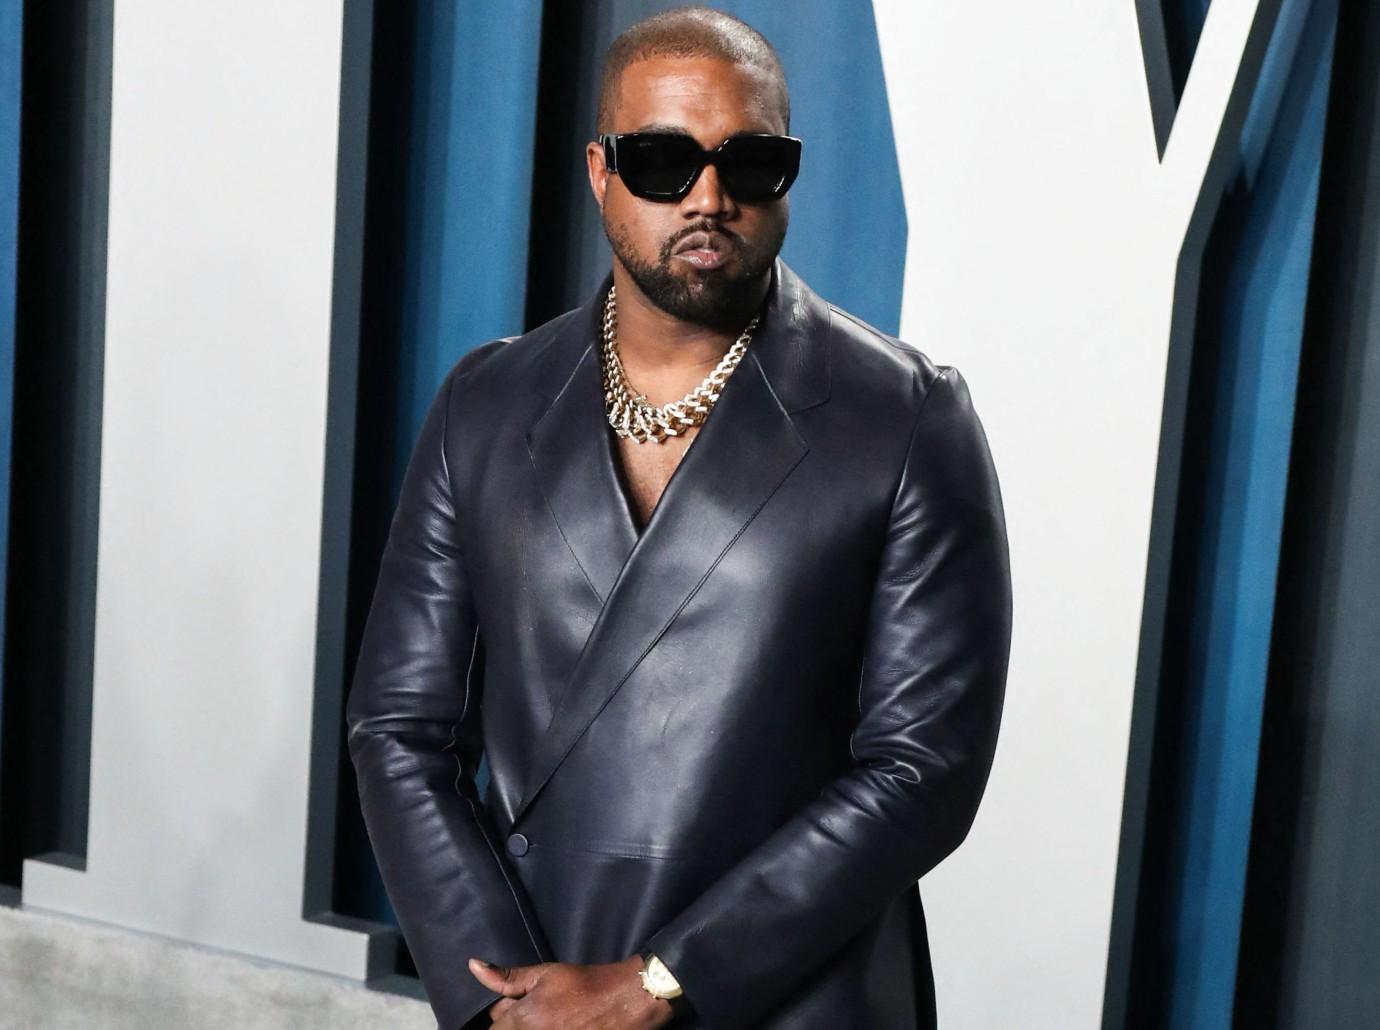 Kanye Wants To Run For President In 2024 With New Wife As First Lady